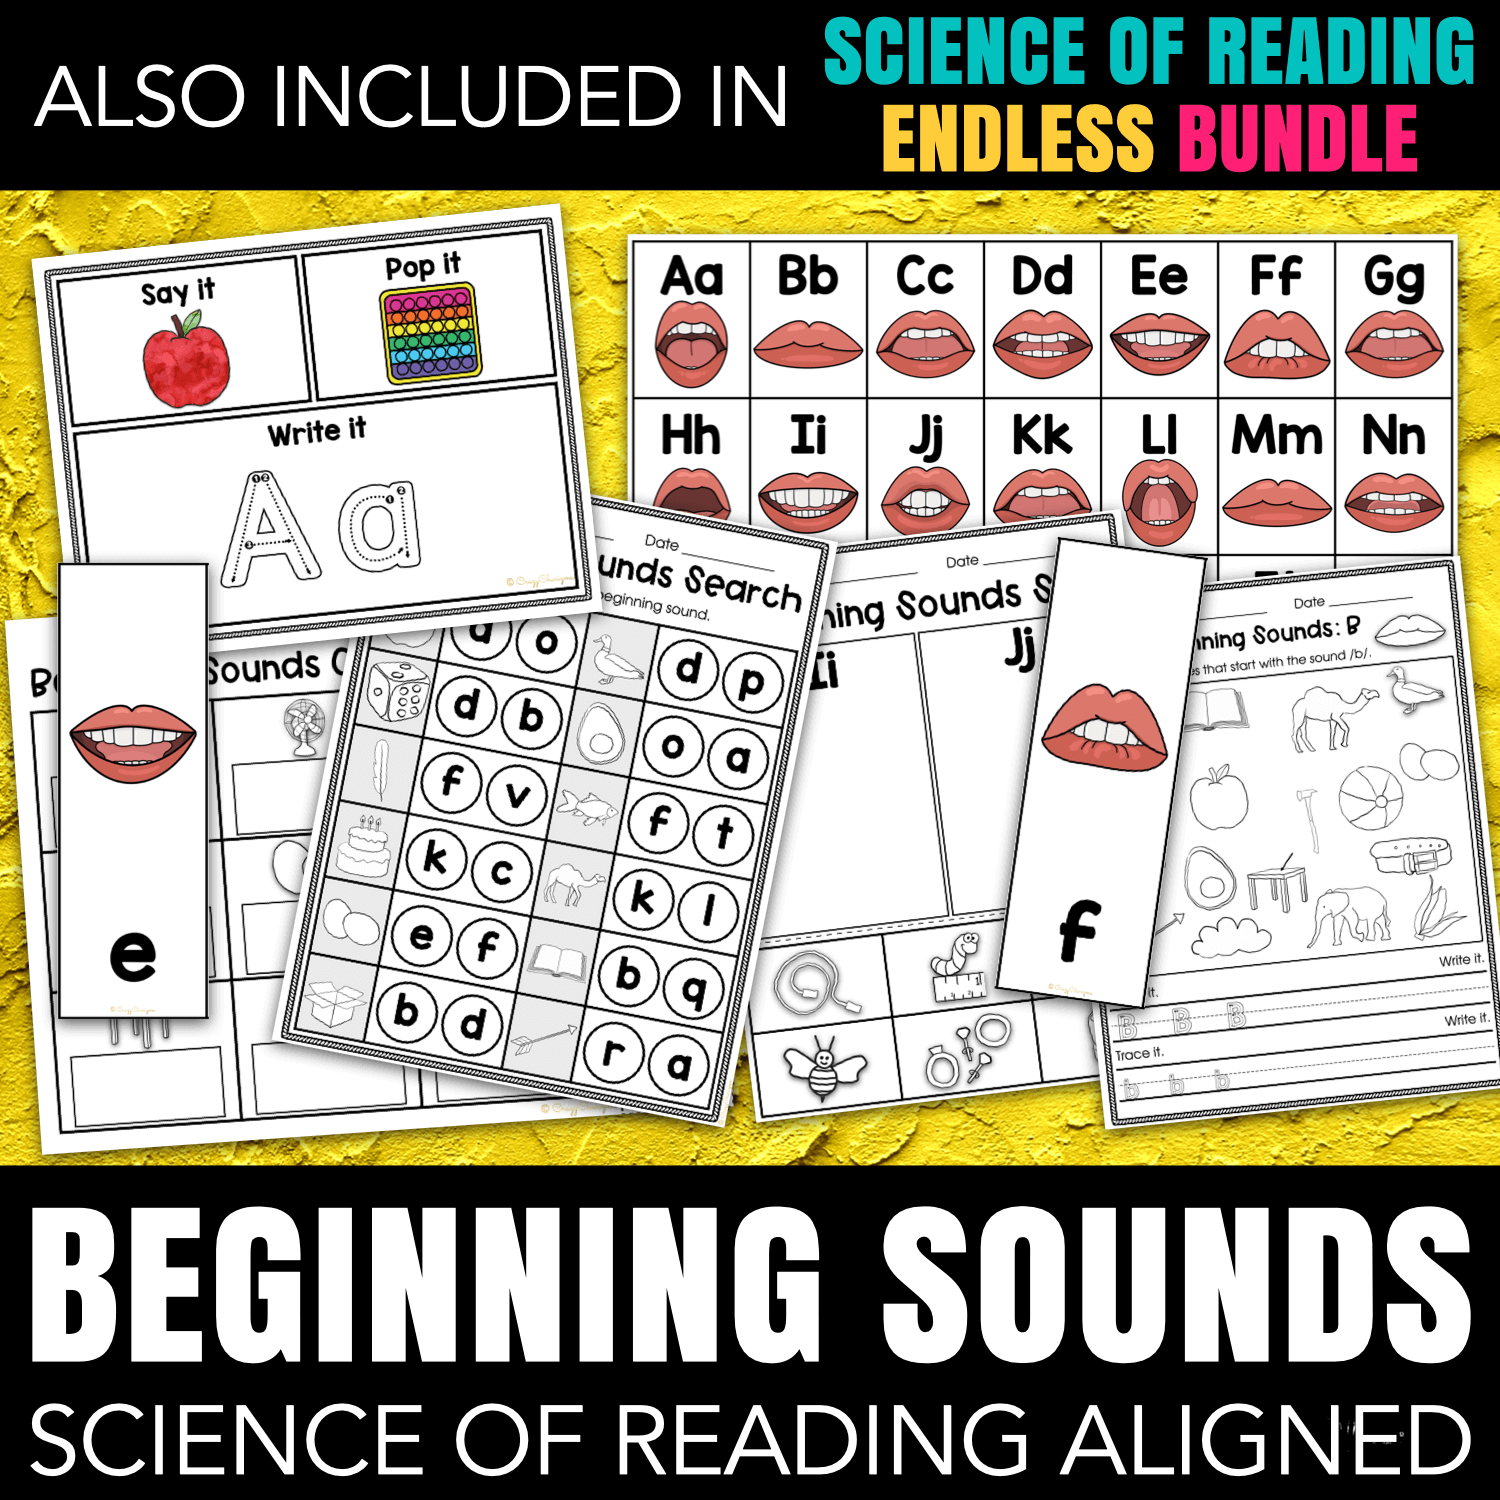 Science of Reading Beginning Sounds